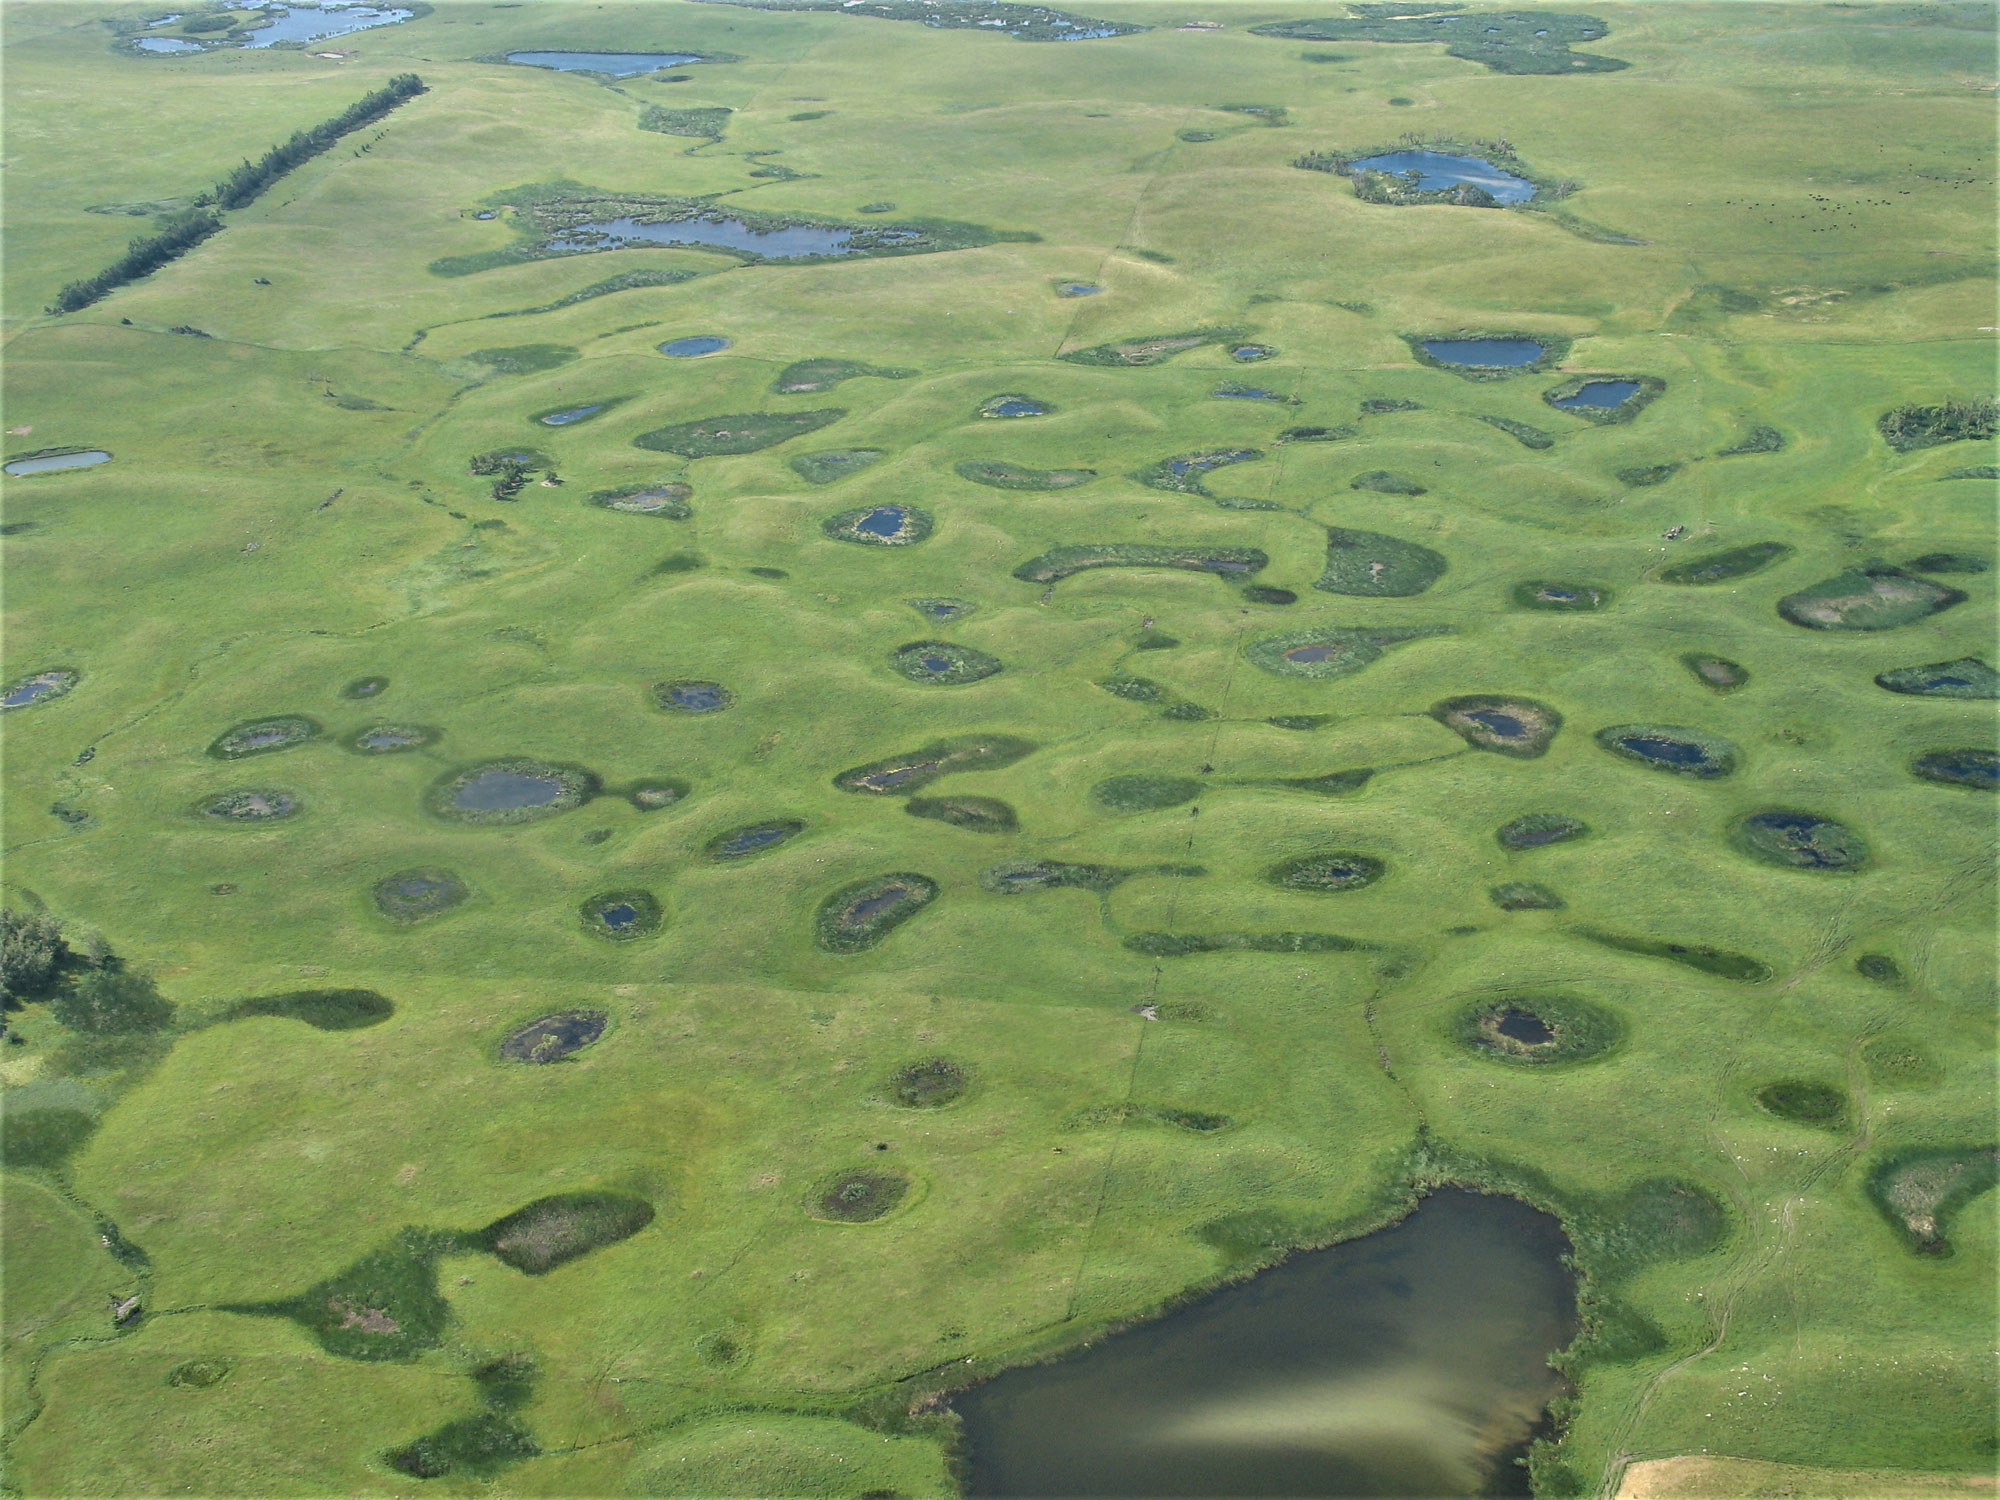 Aerial photograph of prairie potholes in South Dakota. The photo shows a gently rolling landscape covered with green vegetation with scattered lakes and ponds. Trees occur in very sparse clusters or lines.